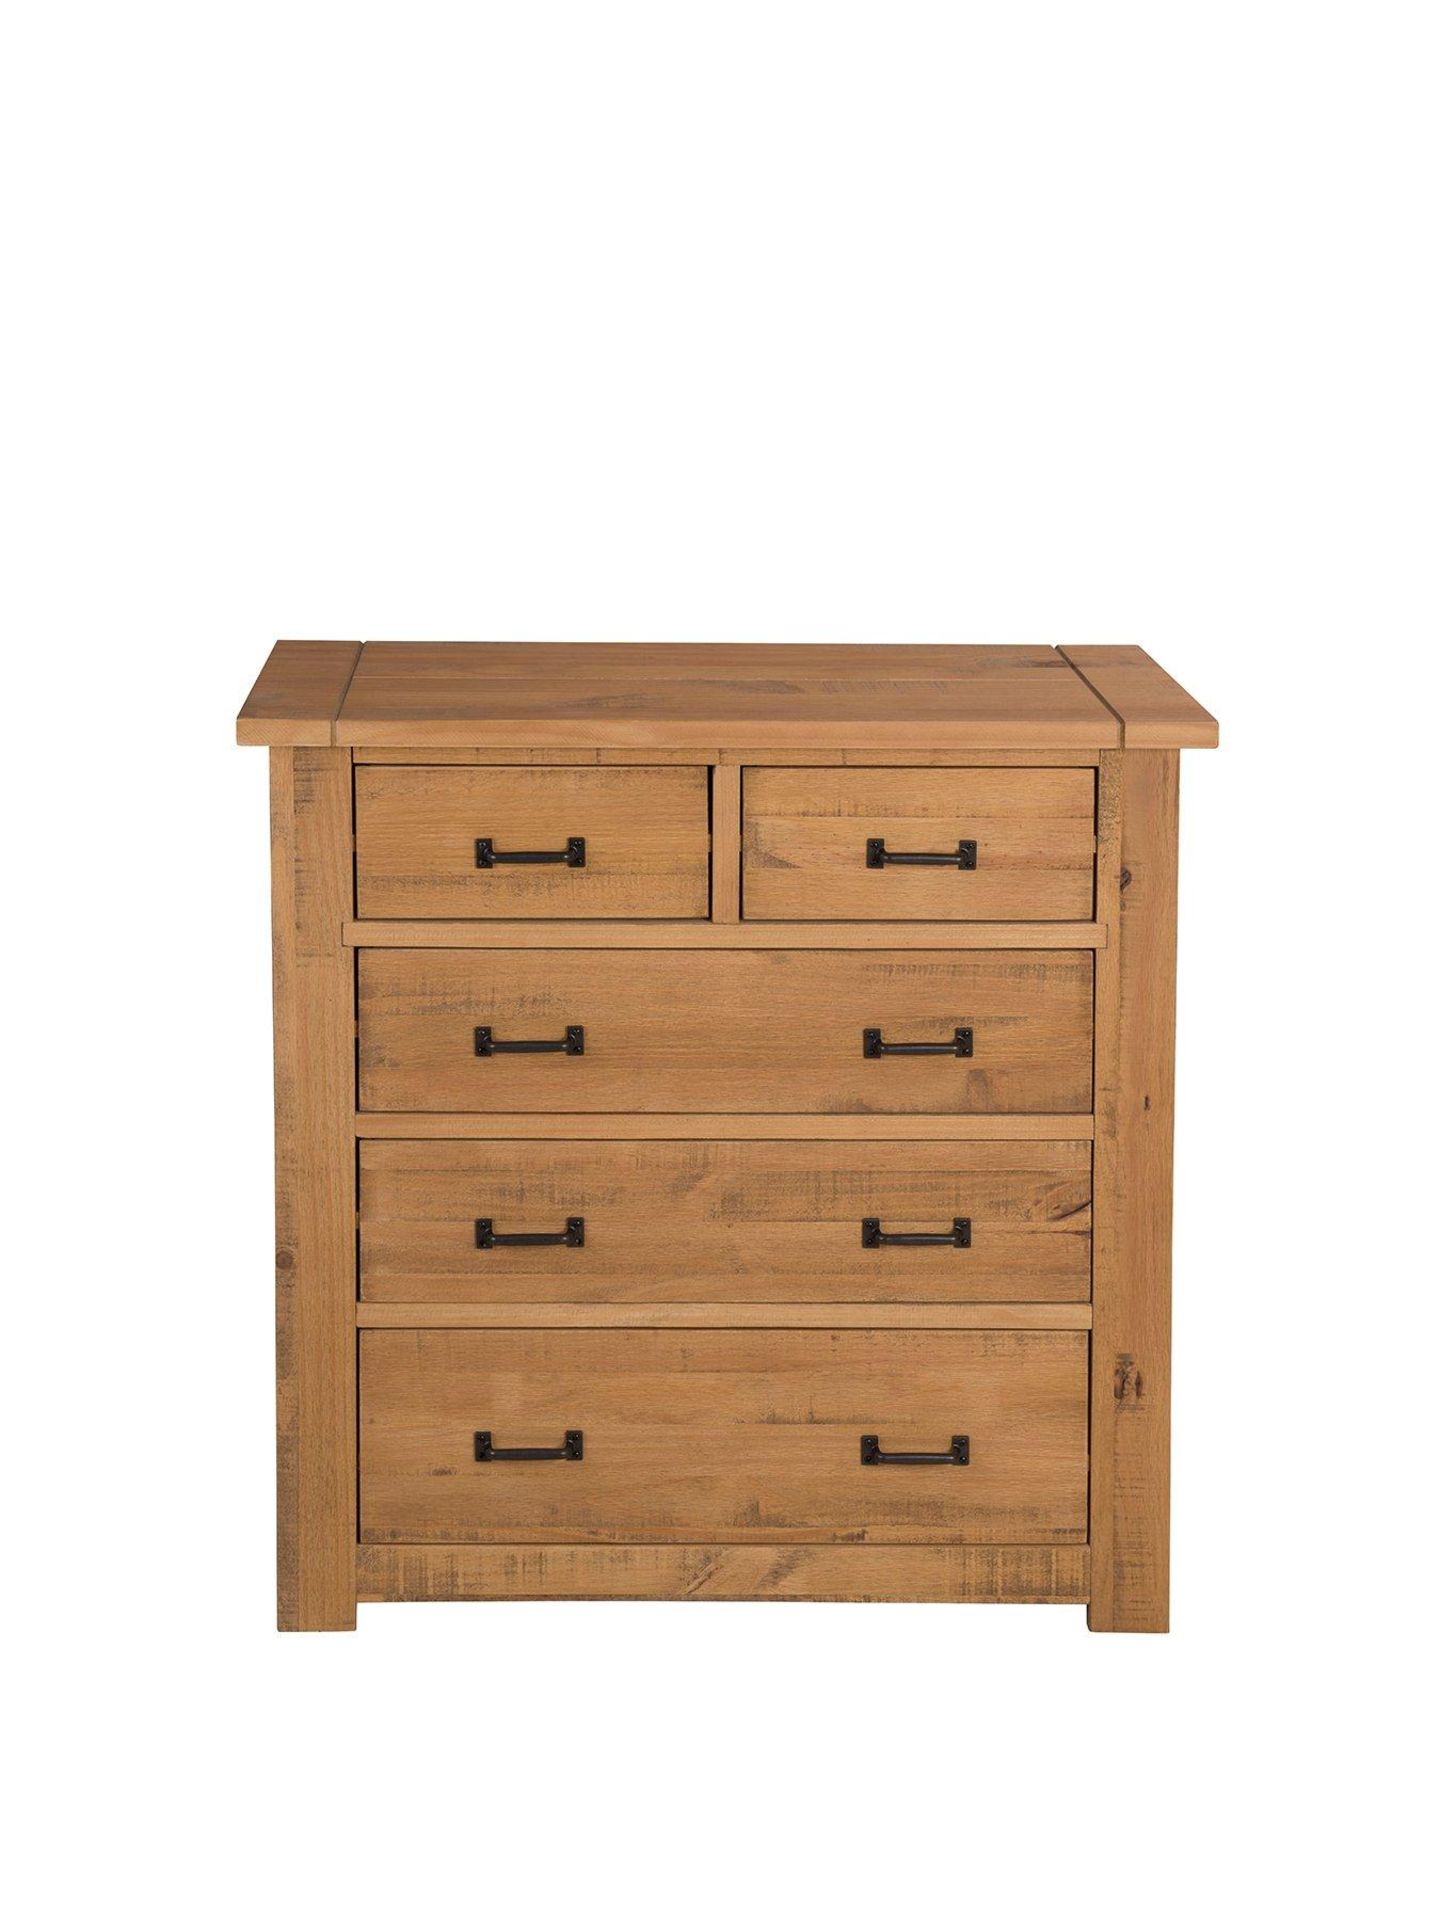 Boxed Item Albion Pine 3Pc Bedroom Set [Rustic Pine] Rrp ¬£1273 - Image 4 of 4